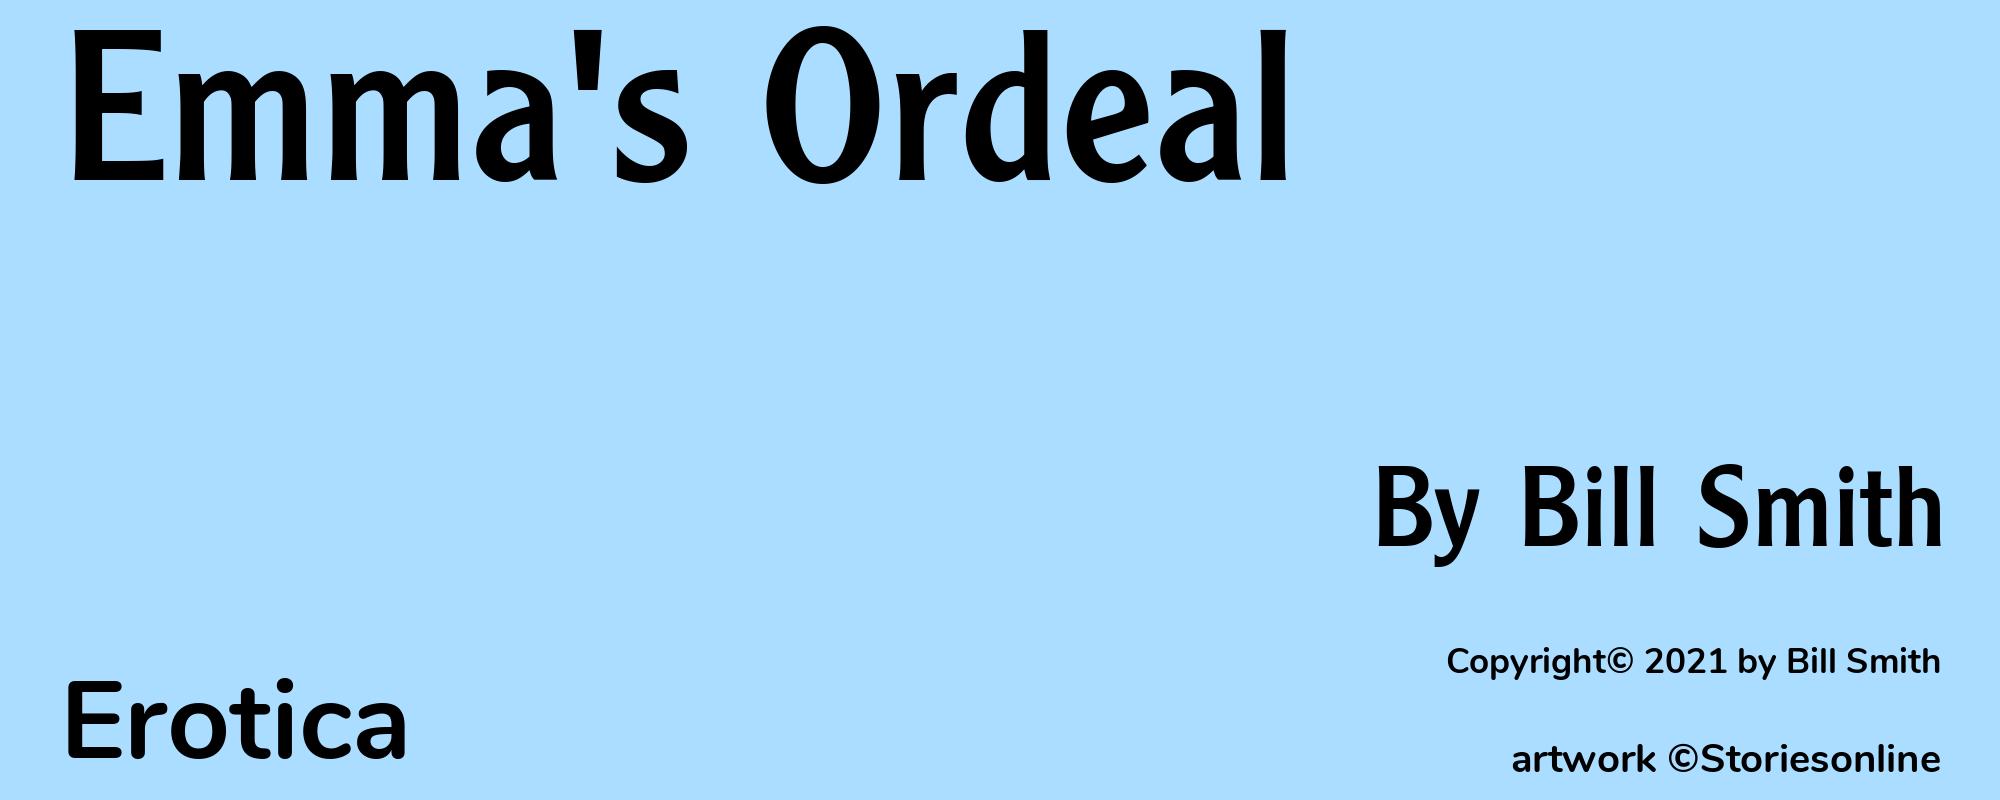 Emma's Ordeal - Cover